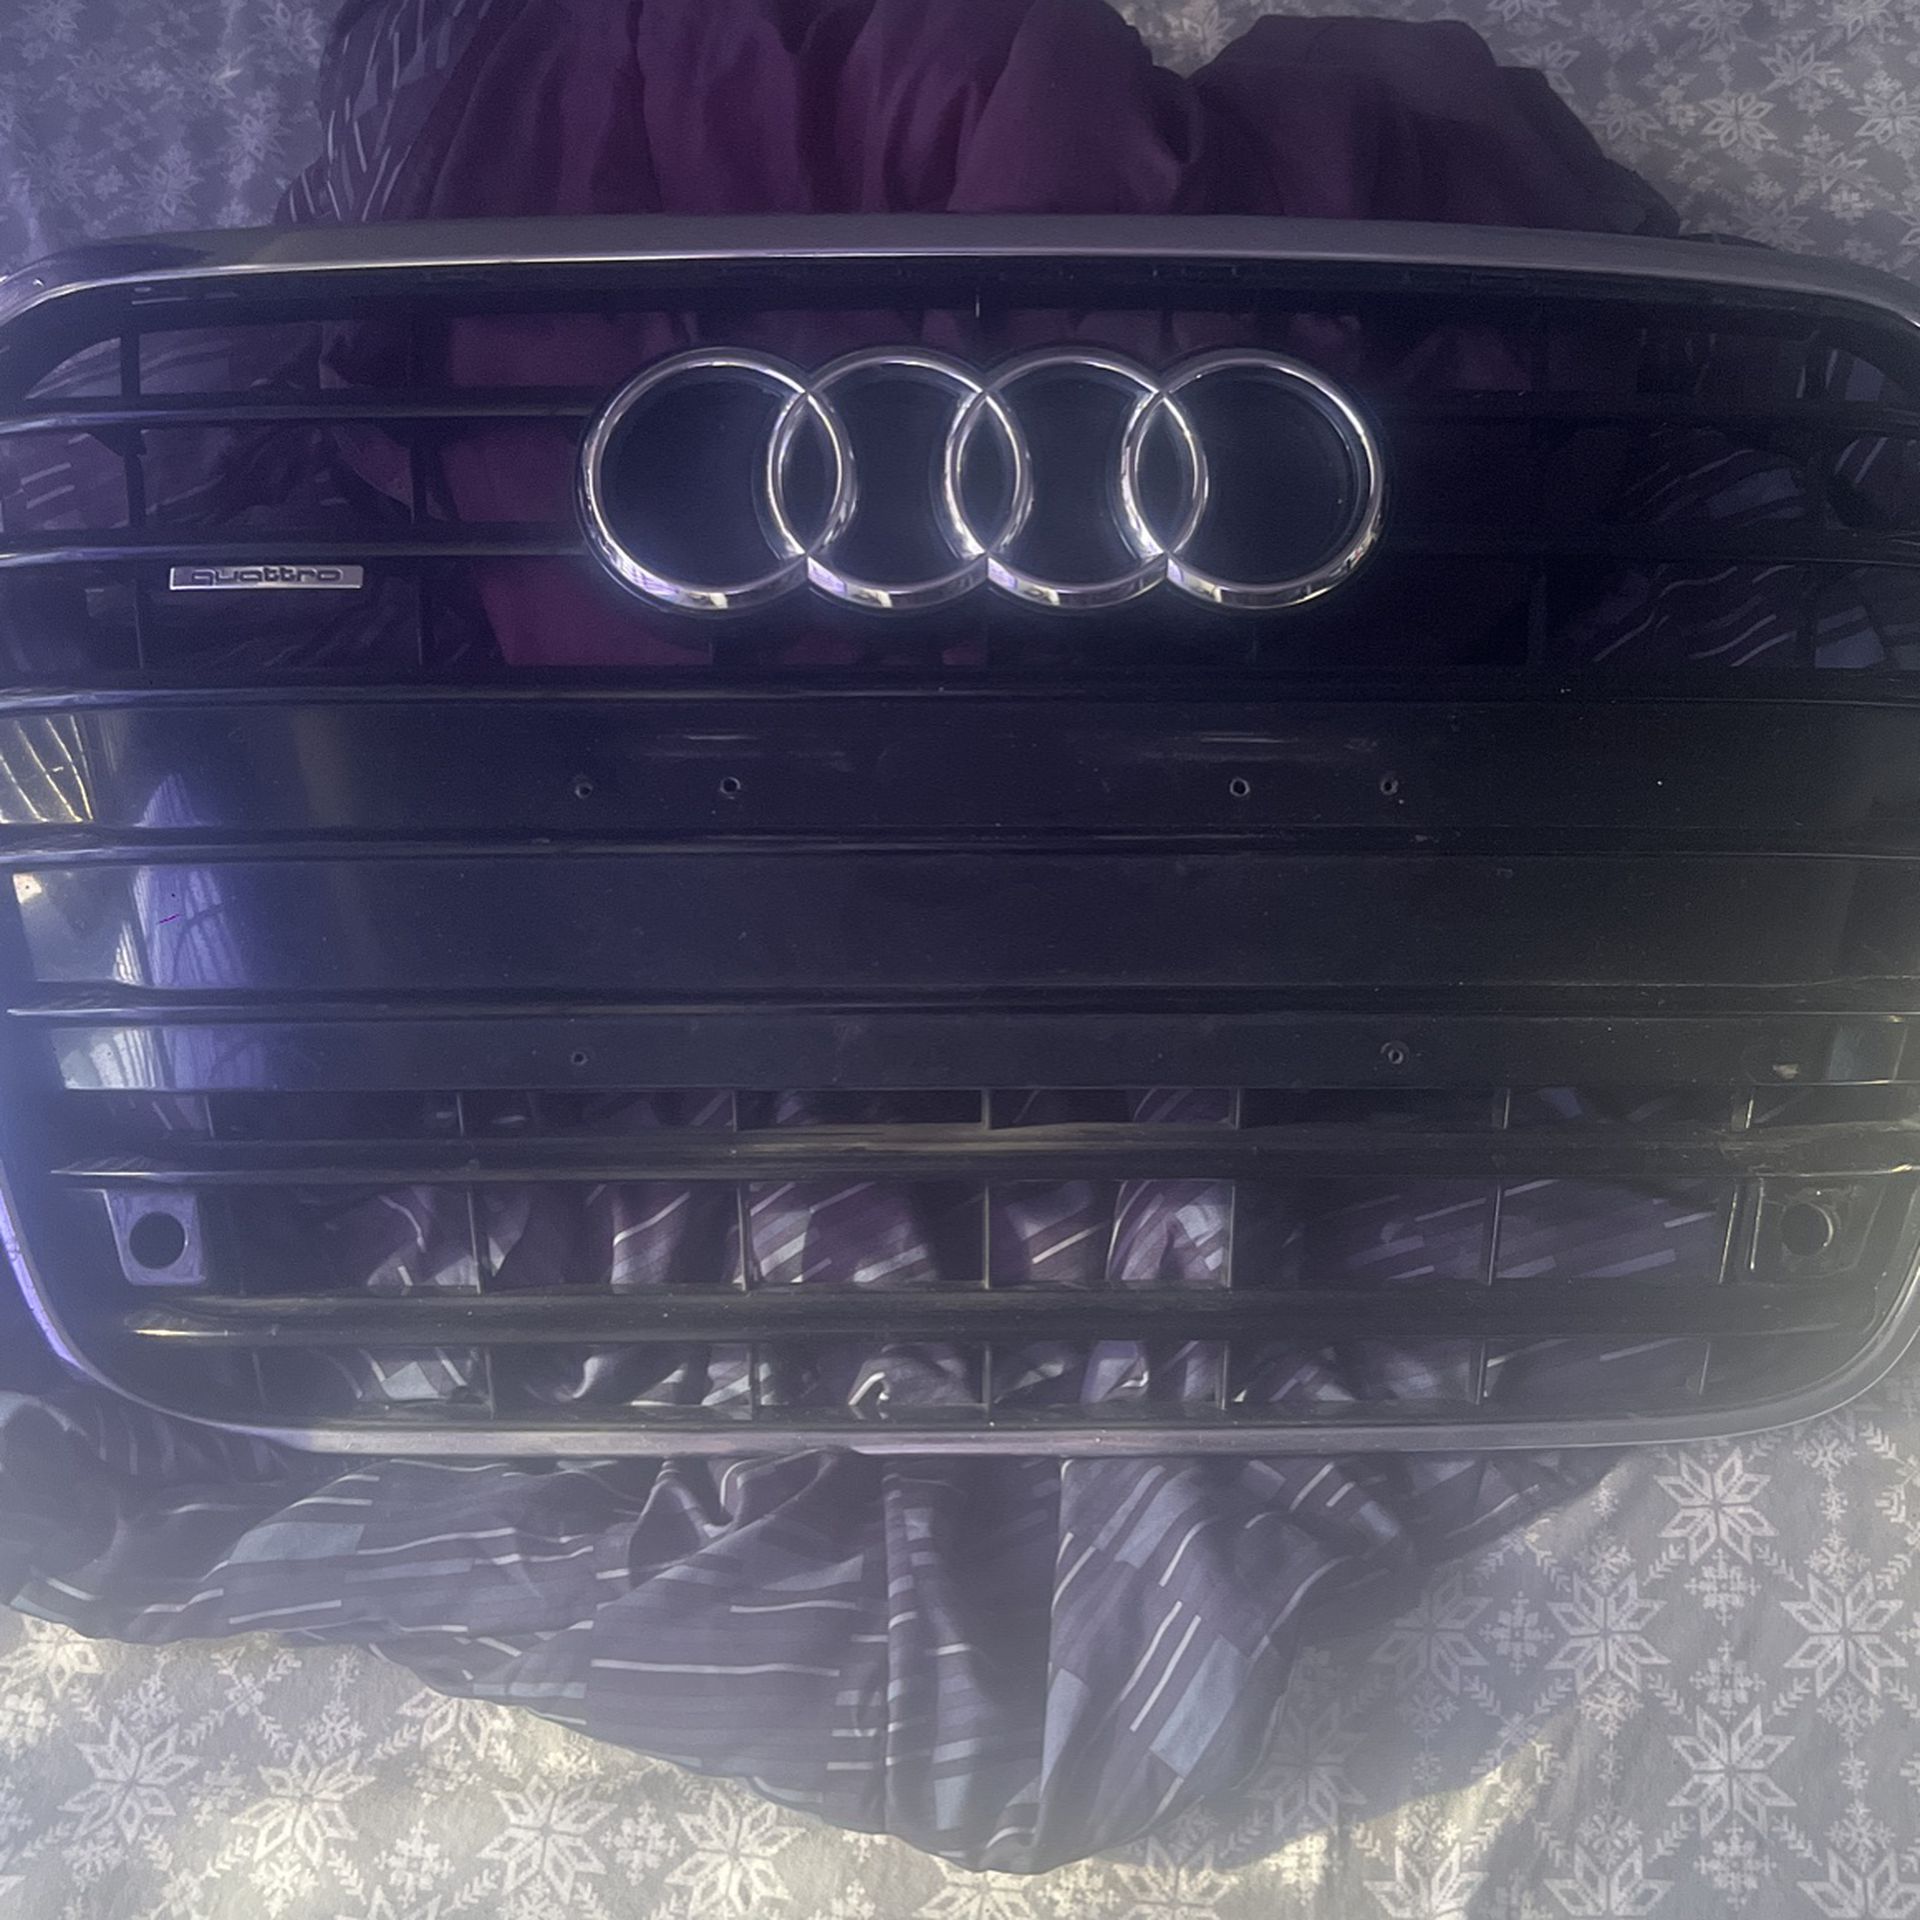 2012-14 audi a6 grill stock